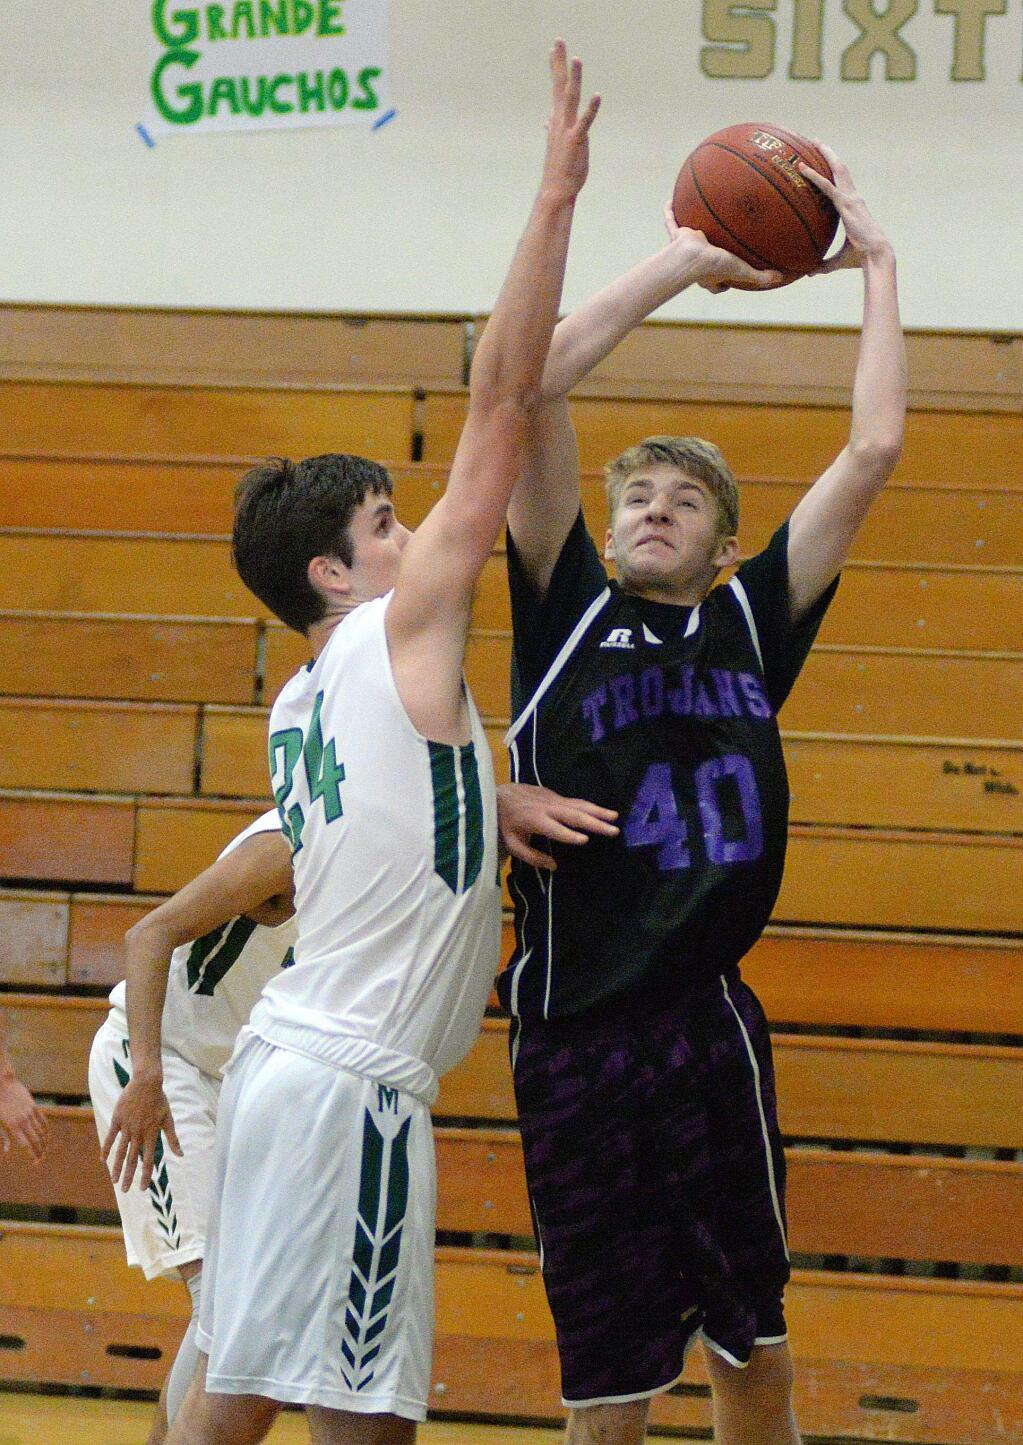 SUMNER FOWLER/FOR THE ARGUS-COURIERPetaluma High's Trojans are counting on continued strong play from Jack Anderson (40) as they begin Sonoma County League play Tuesday at Healdsburg.